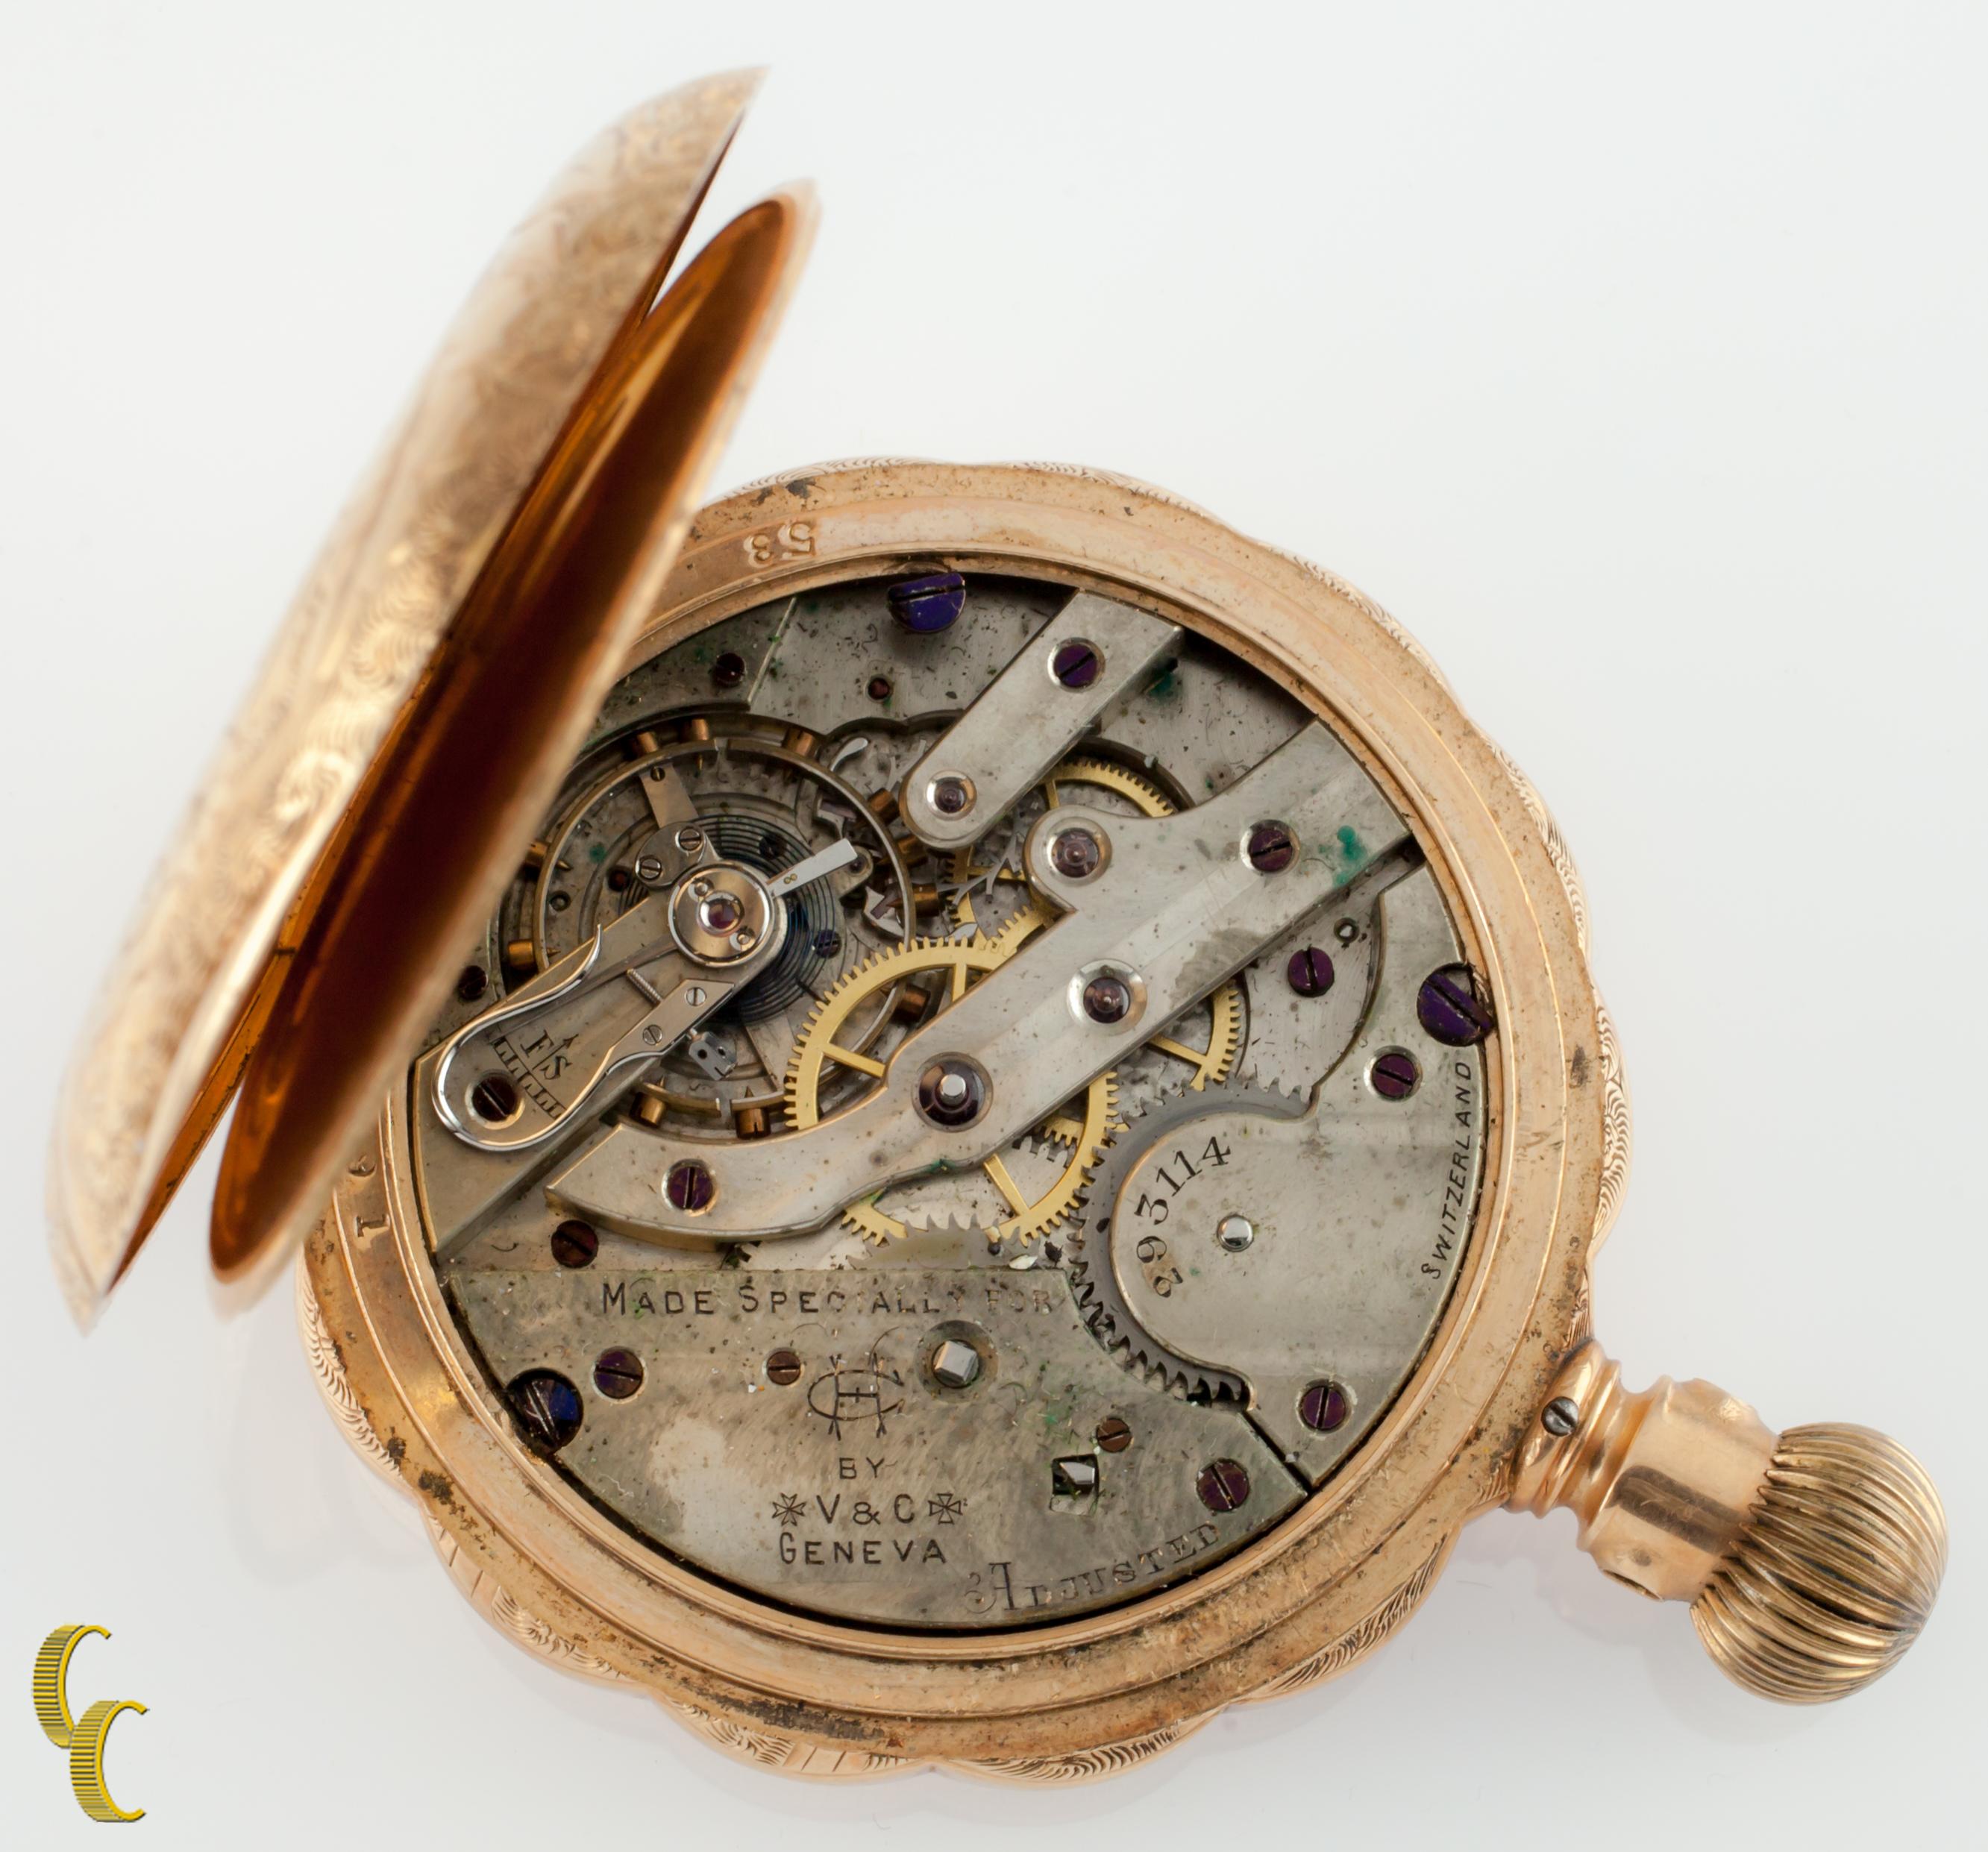 Beautiful Antique Vacheron & Constantin Pocket Watch w/ White Dial Including Gold Hands & Dedicated Second Dial
14k Yellow Solid Gold Case w/ Intricate Hand-Etched Design on Case
Black Arabic Numerals
Case Serial #735391
15-Jewel Elgin Movement